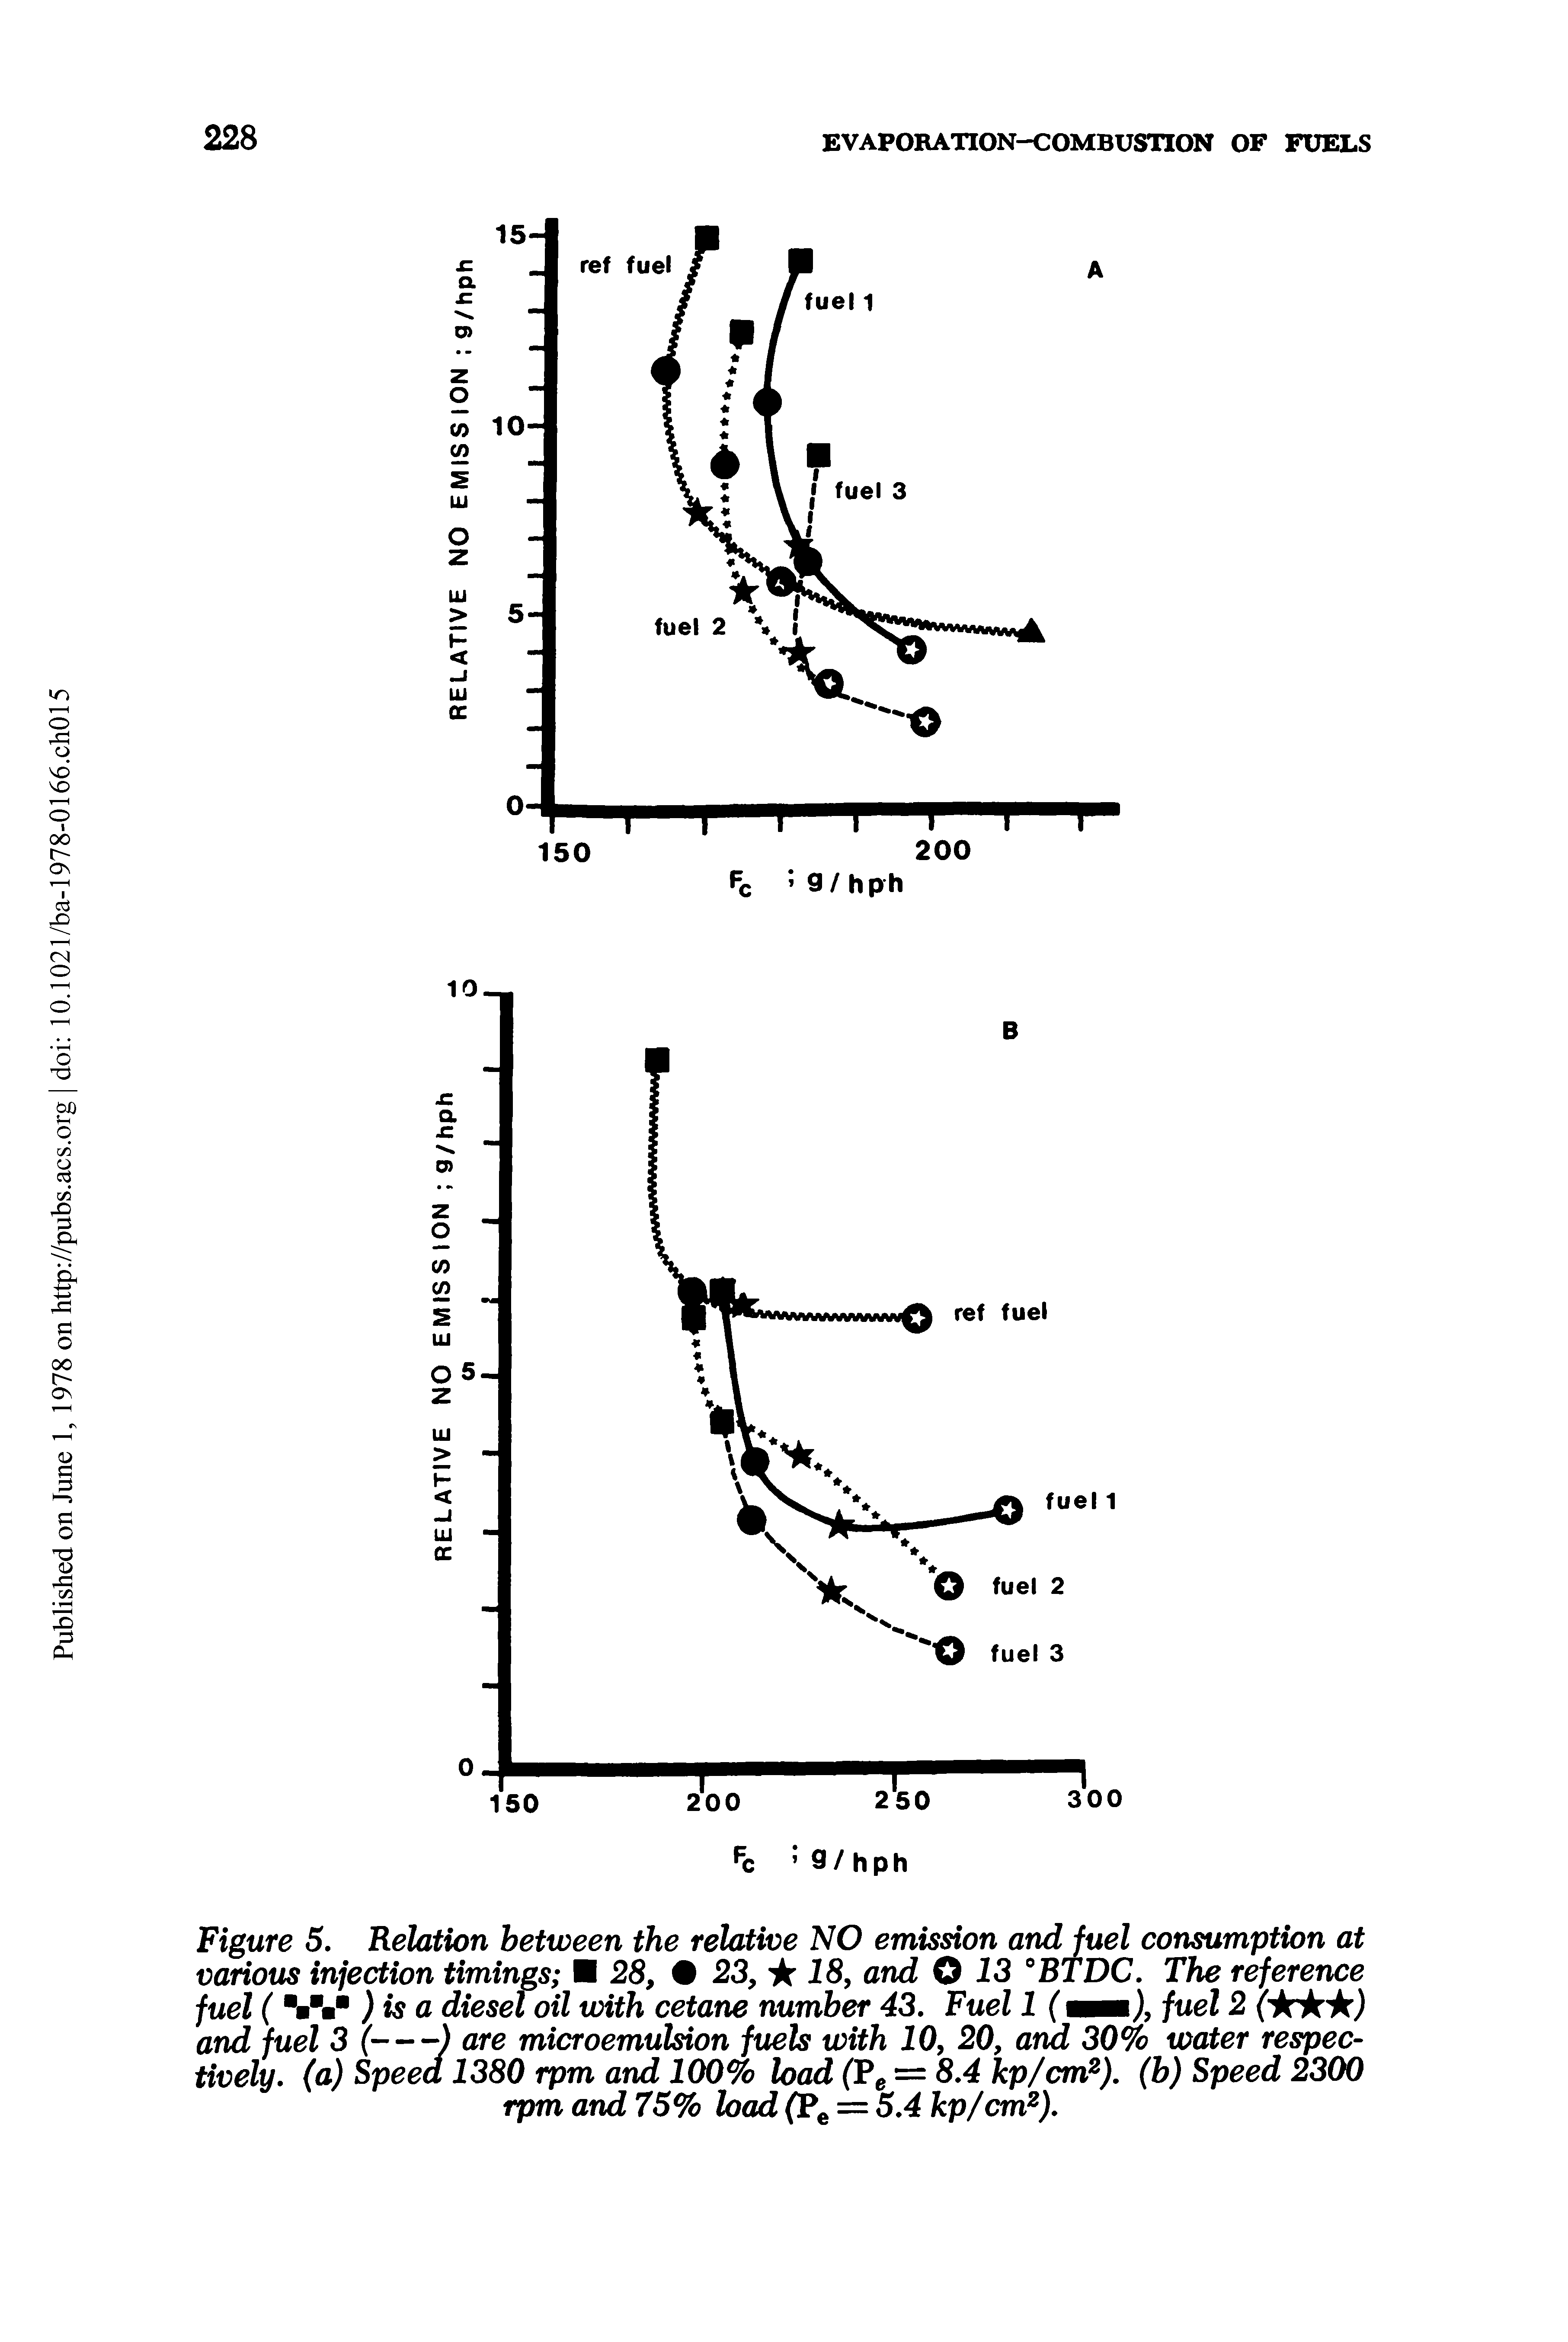 Figure 5. Relation between the relative NO emission and fuel consumption at various injection timings 28, 23, 18, and O 13 ""BTDC, The reference fuel ( ) is a diesel oil with cetane number 43. Fuel 1 (mmti), fuel 2 (irkif ) and fuel 3 (---) are microemulsion fuels with 10, 20, arid 30% water respec-...